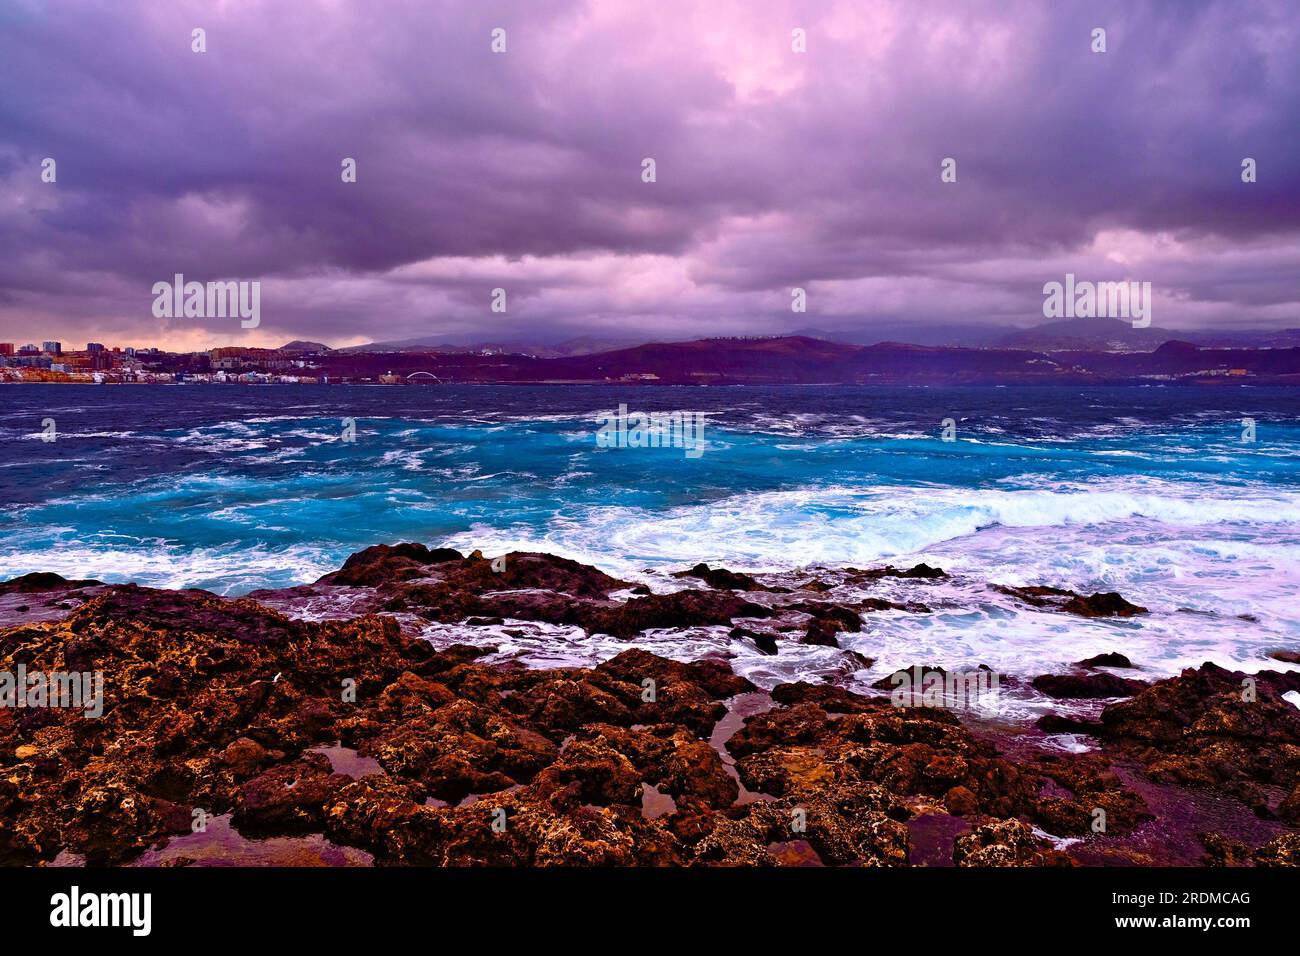 Winter ocean weather with heavy rain clouds, ominous rocky coast and sea froth. Stock Photo